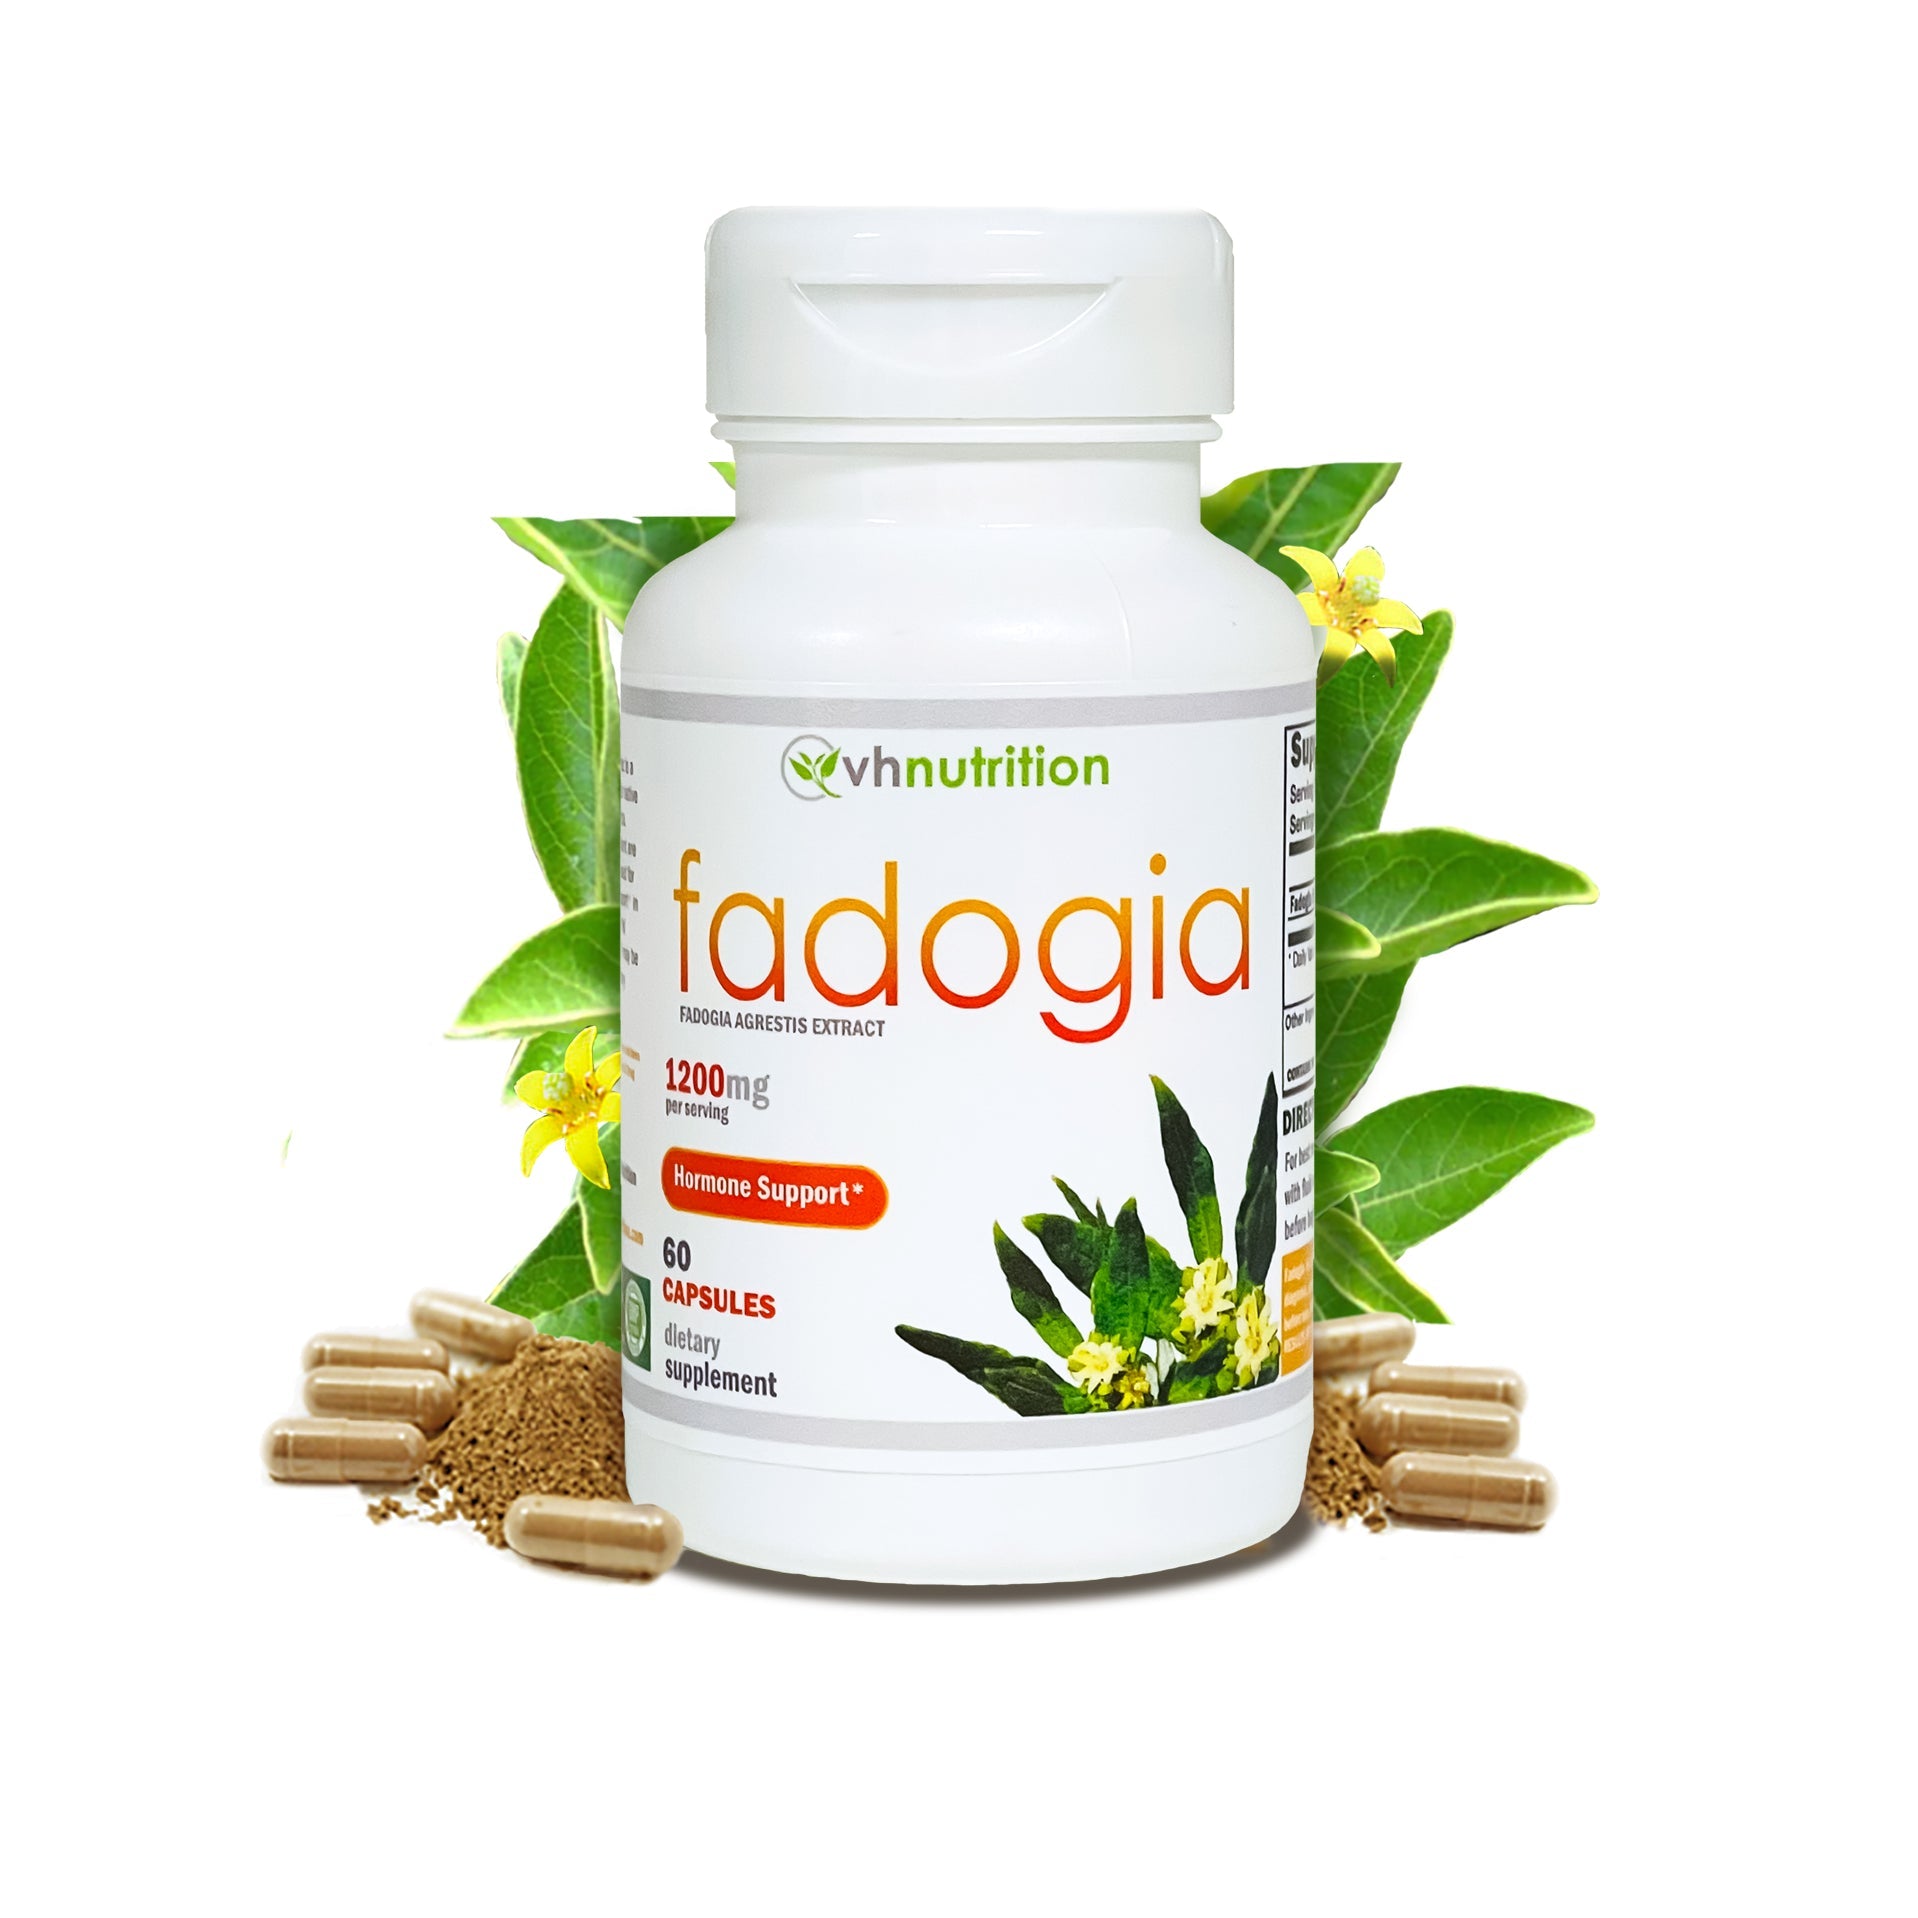 VH Nutrition FADOGIA AGRESTIS | 1200mg Per Serving | Mens Hormonal Support* | 60 Capsules